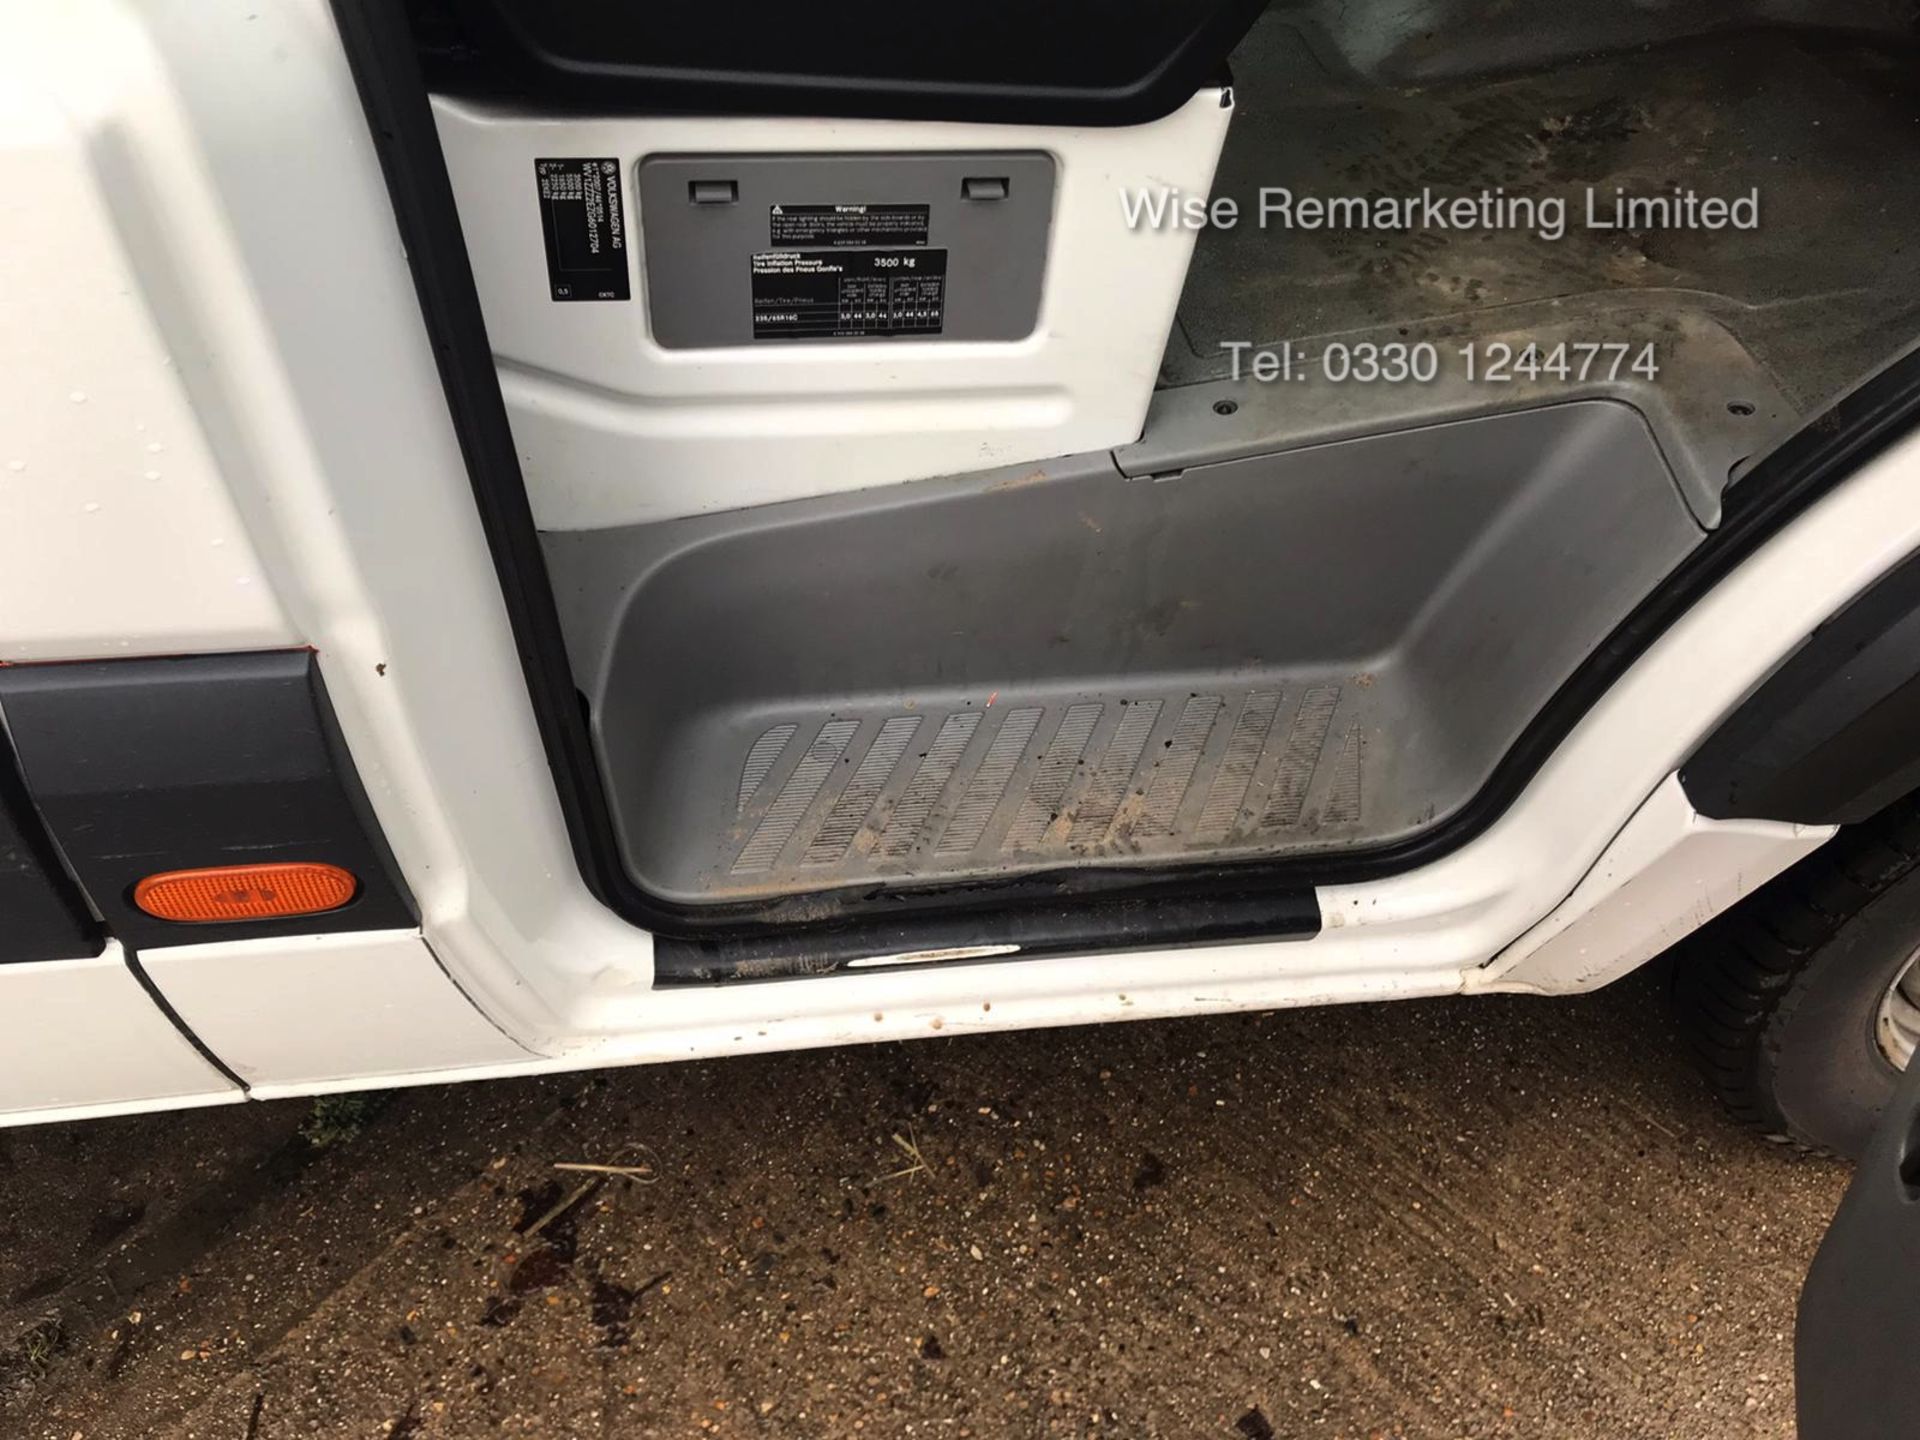 Volkswagen Crafter CR35 Startline 2.0l TDi - LWB - 2016 Model -1 Keeper From New - Service History - Image 12 of 15